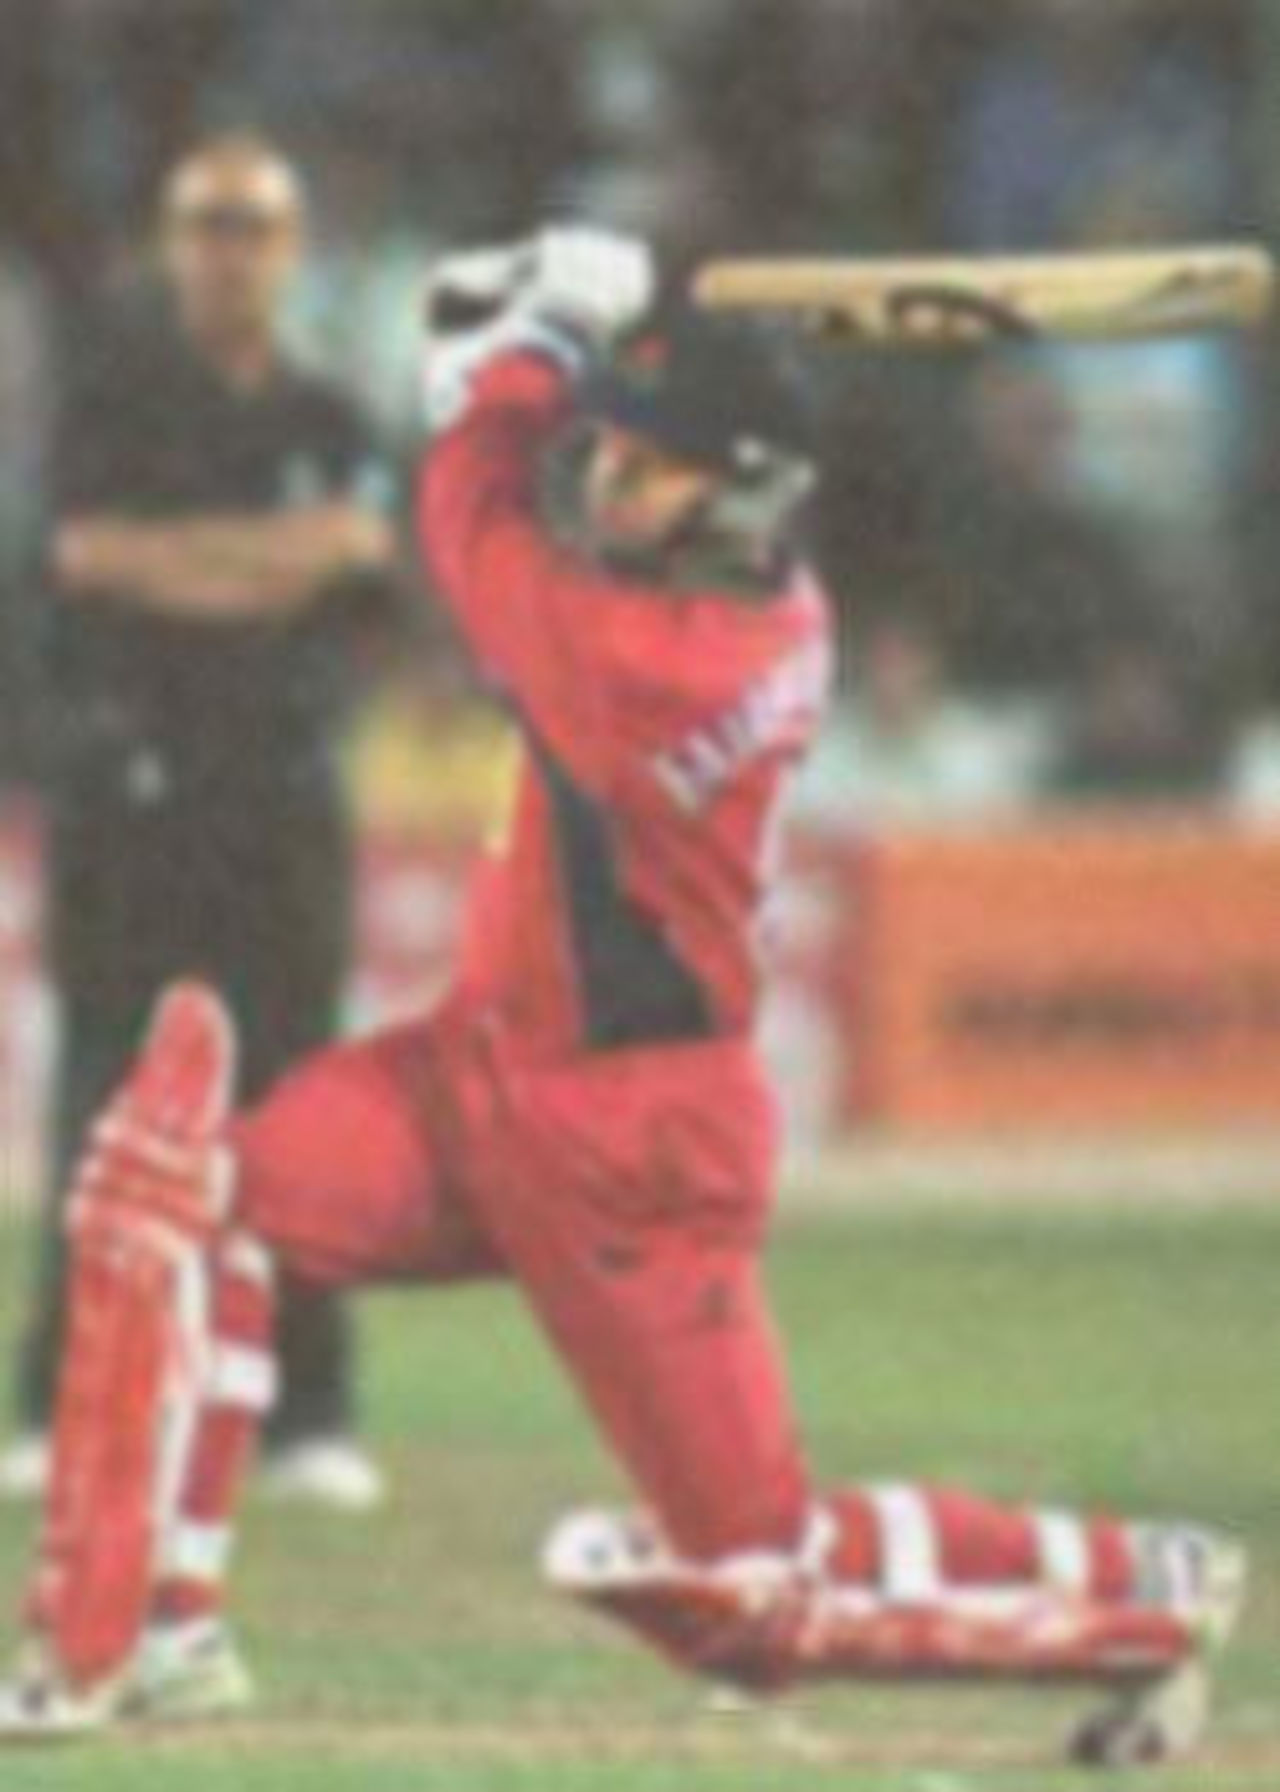 Fairbrother executes a copy book cover drive, National League Division One, 2000, Sussex v Lancashire, New County Ground, Hove, Brighton, 07 August 2000.